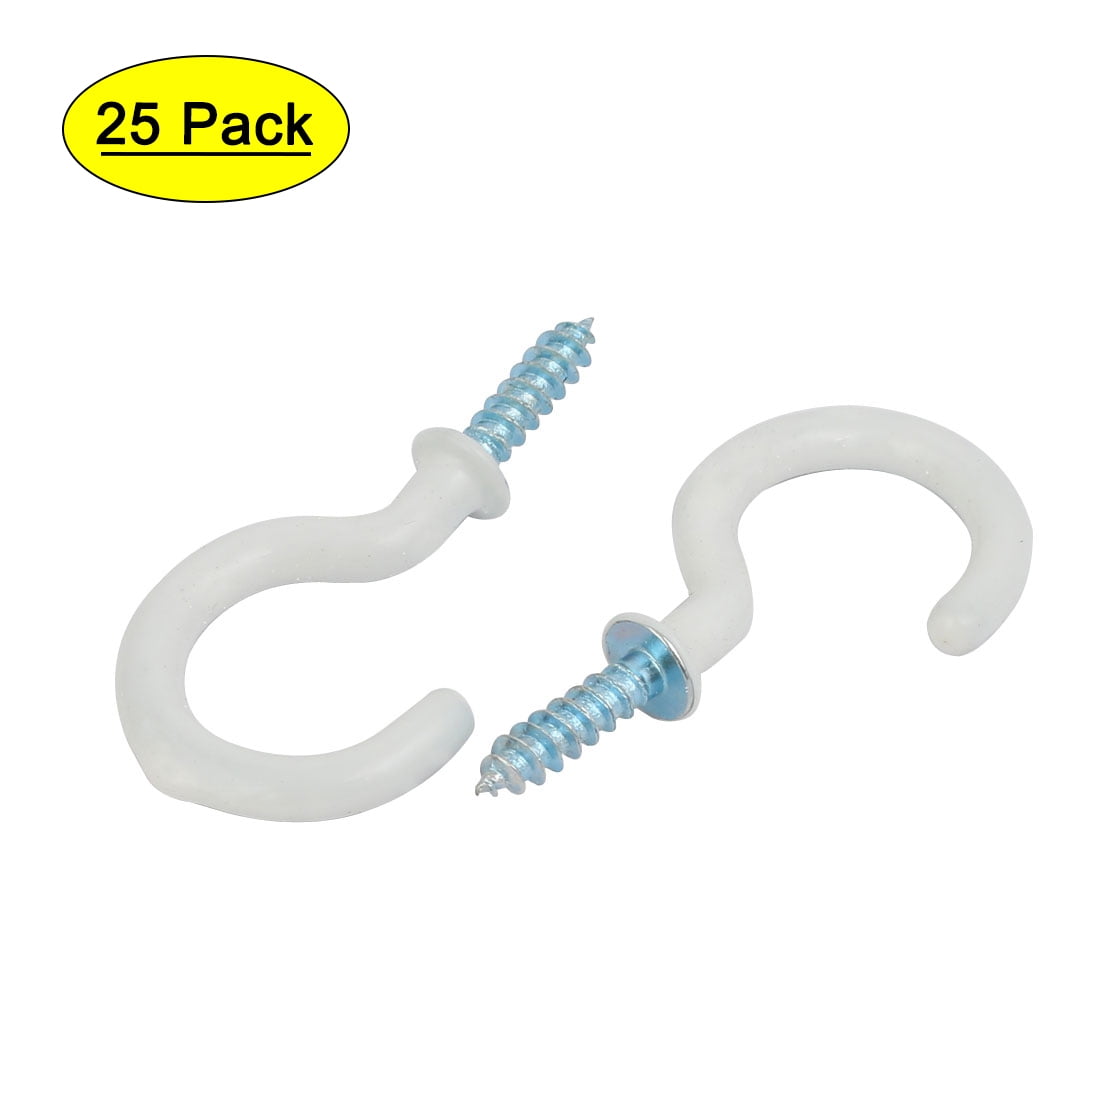 Details about   12 pc Metal  WHITE PVC COATED Cup Hooks  Screw-In Hanger 3/4"  2 CM STRONG 